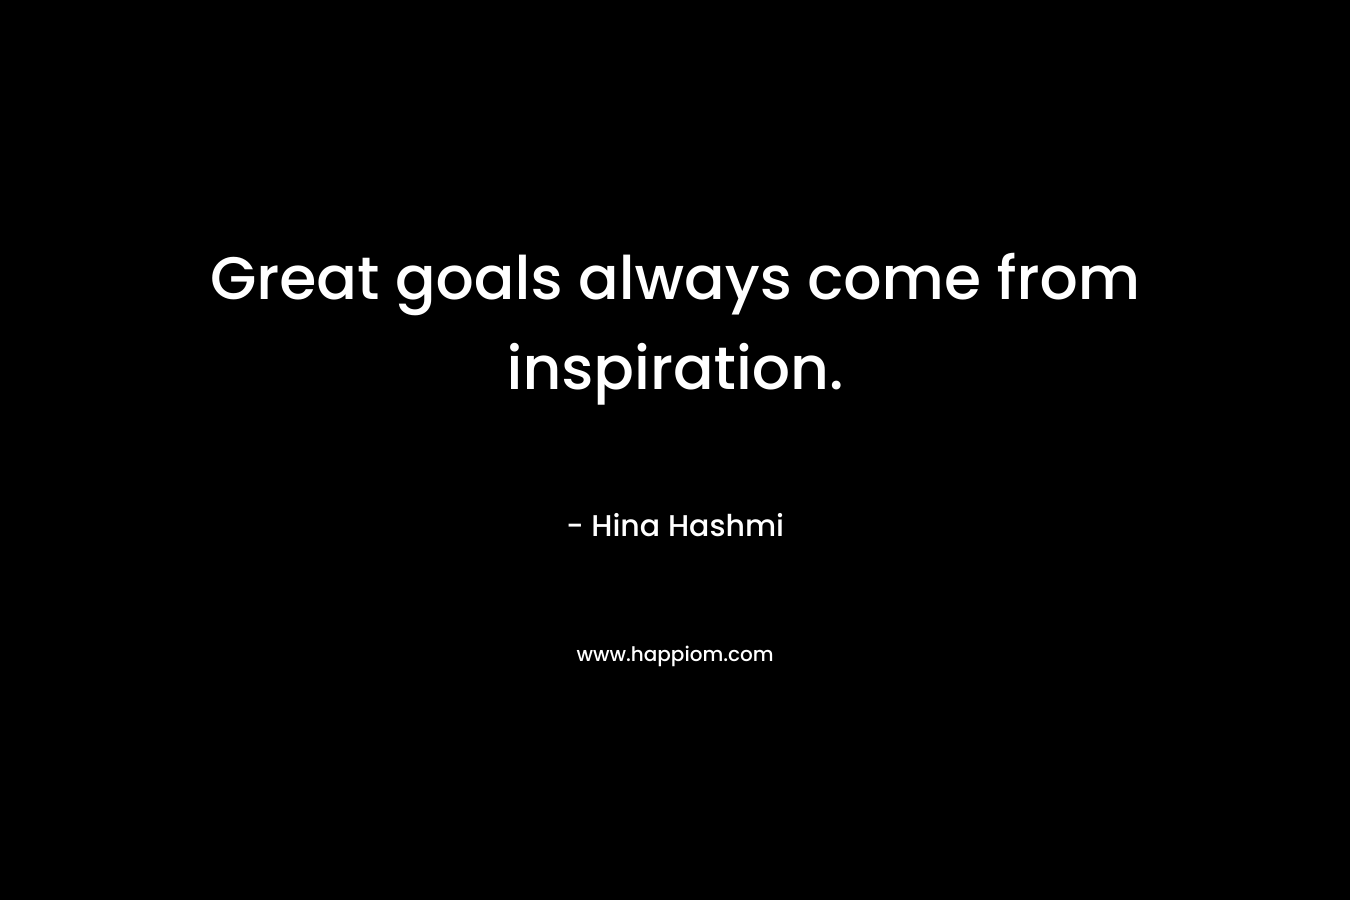 Great goals always come from inspiration.